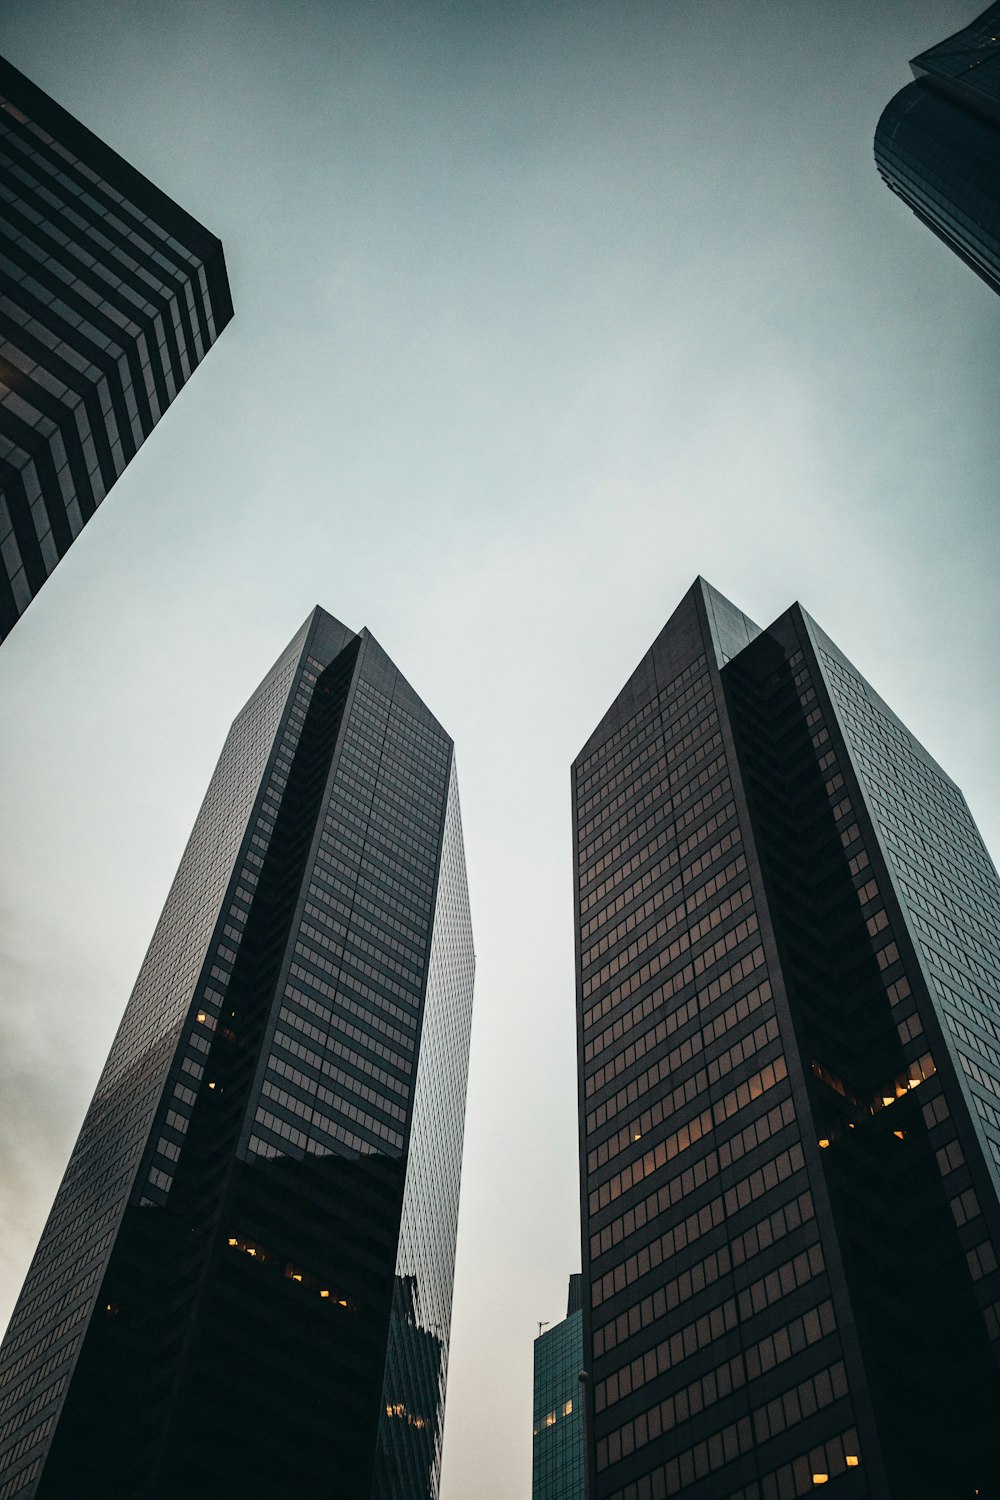 550+ Building In Background Pictures | Download Free Images on Unsplash